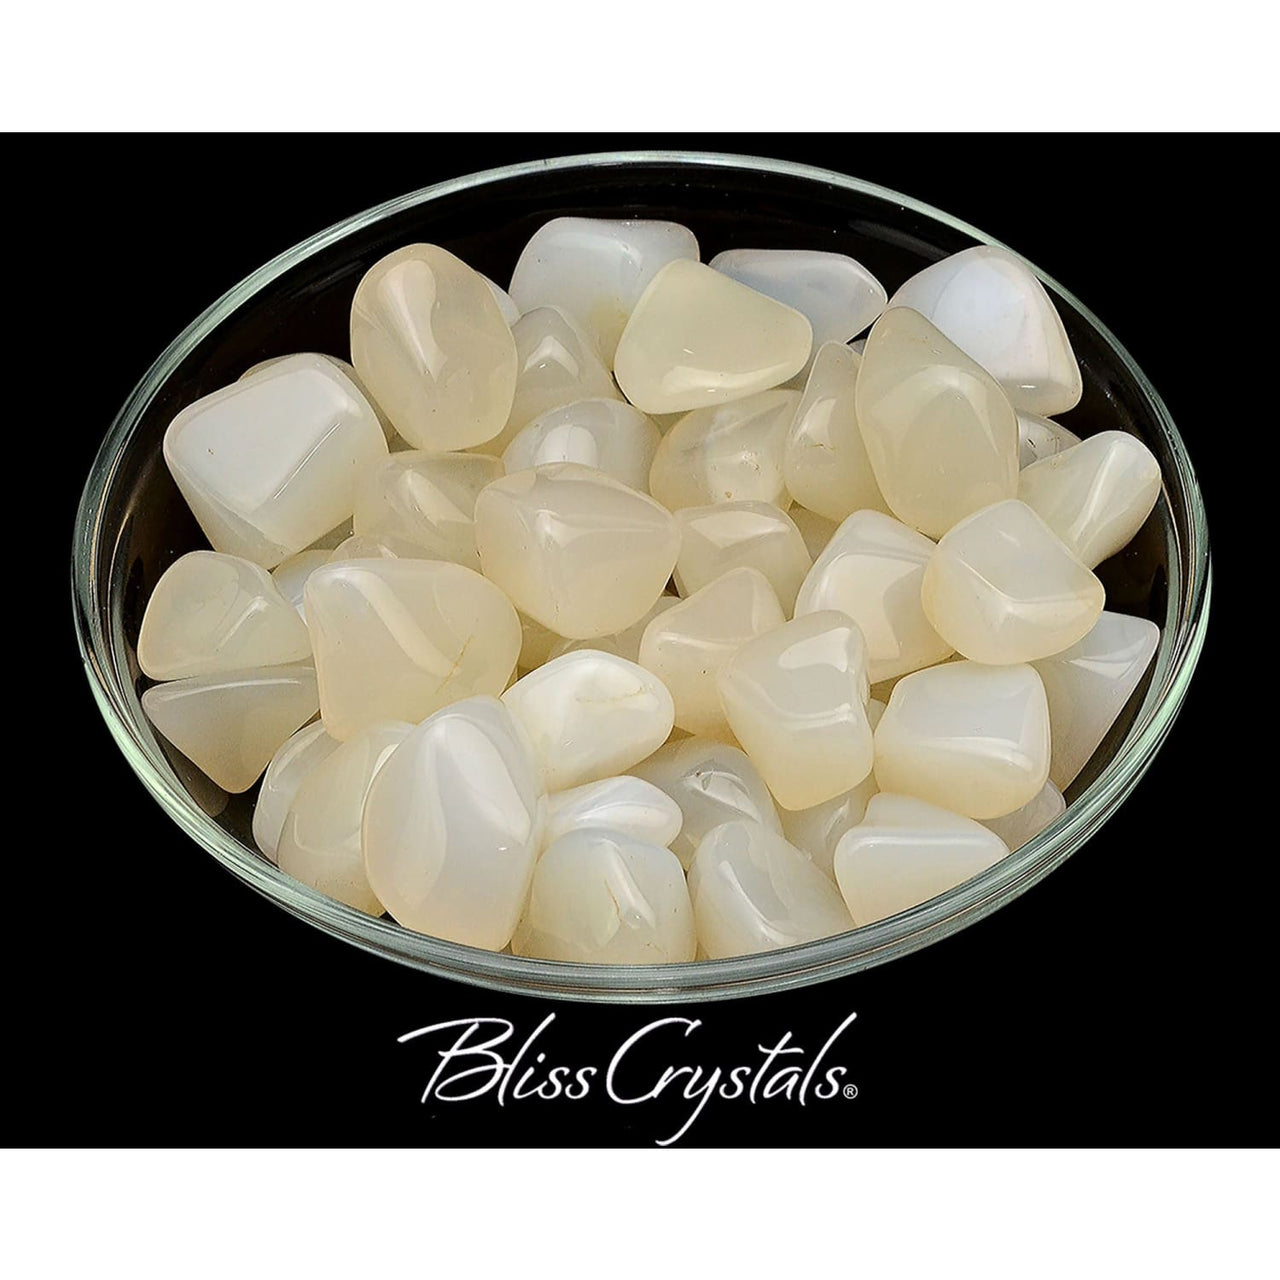 2 WHITE AGATE Tumbled Stones for Soothing + Calming #WA24